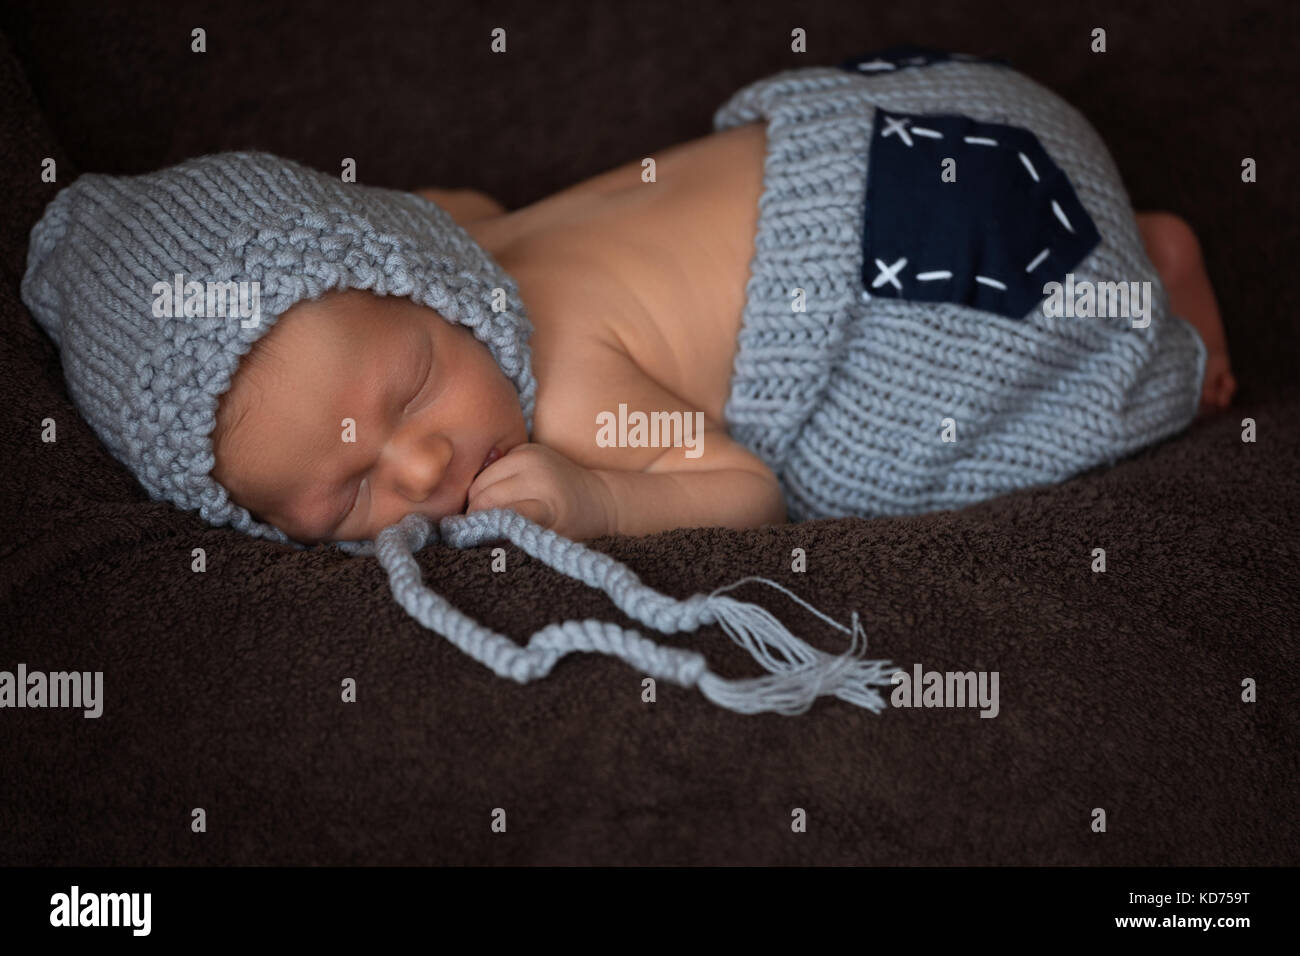 Newborn baby in a gray knitted suit sleeps in a beautiful pose Stock Photo